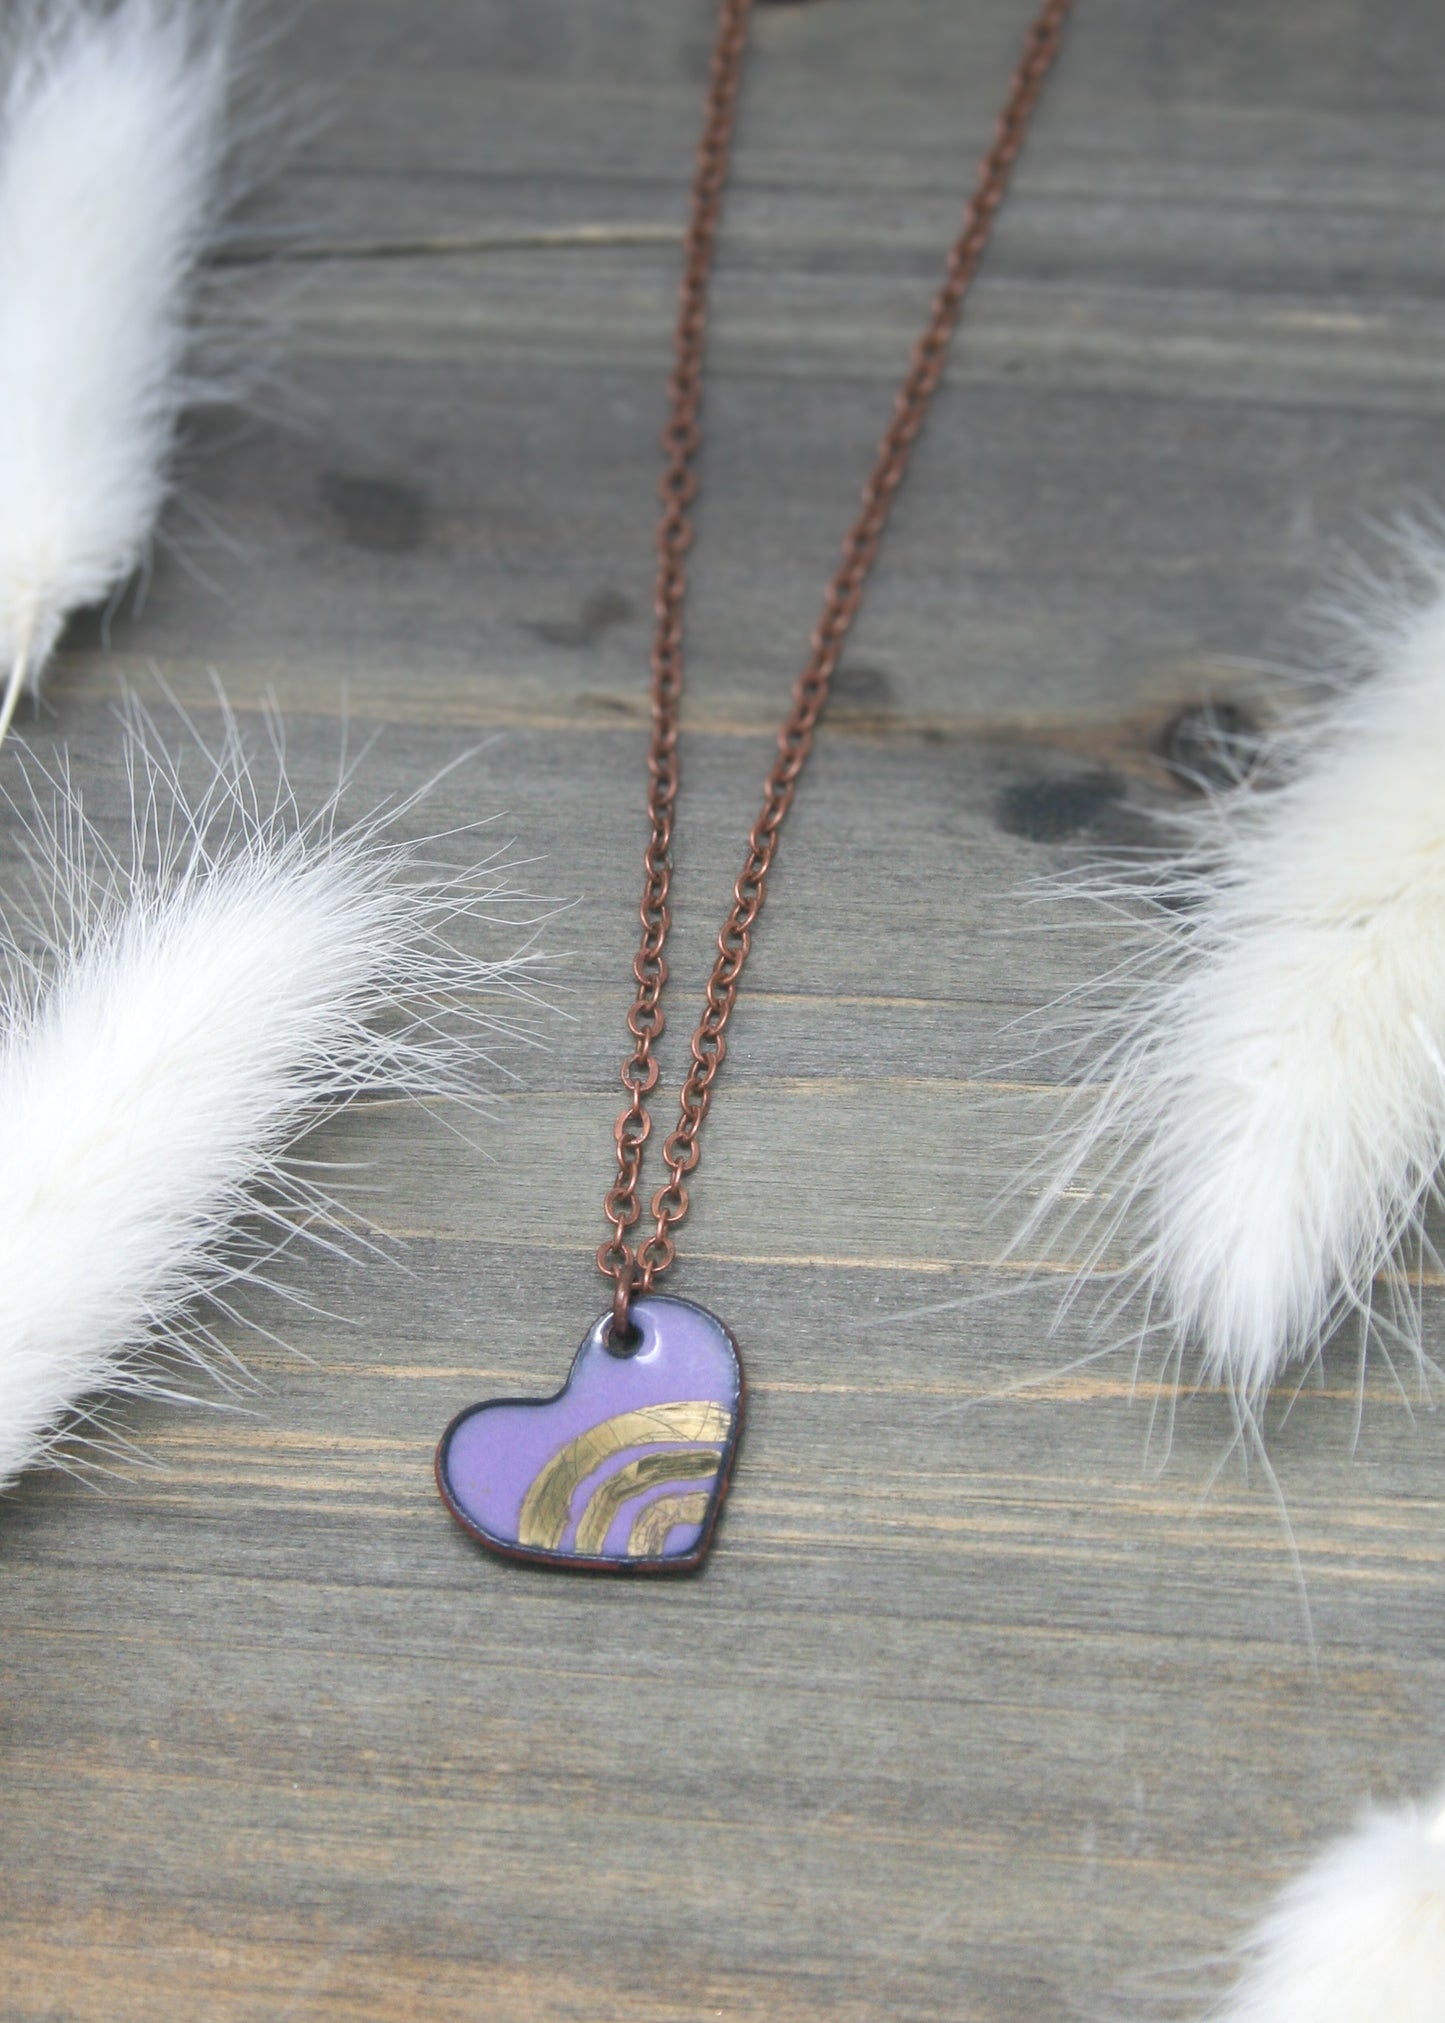 a necklace with a heart shaped pendant on a wooden surface